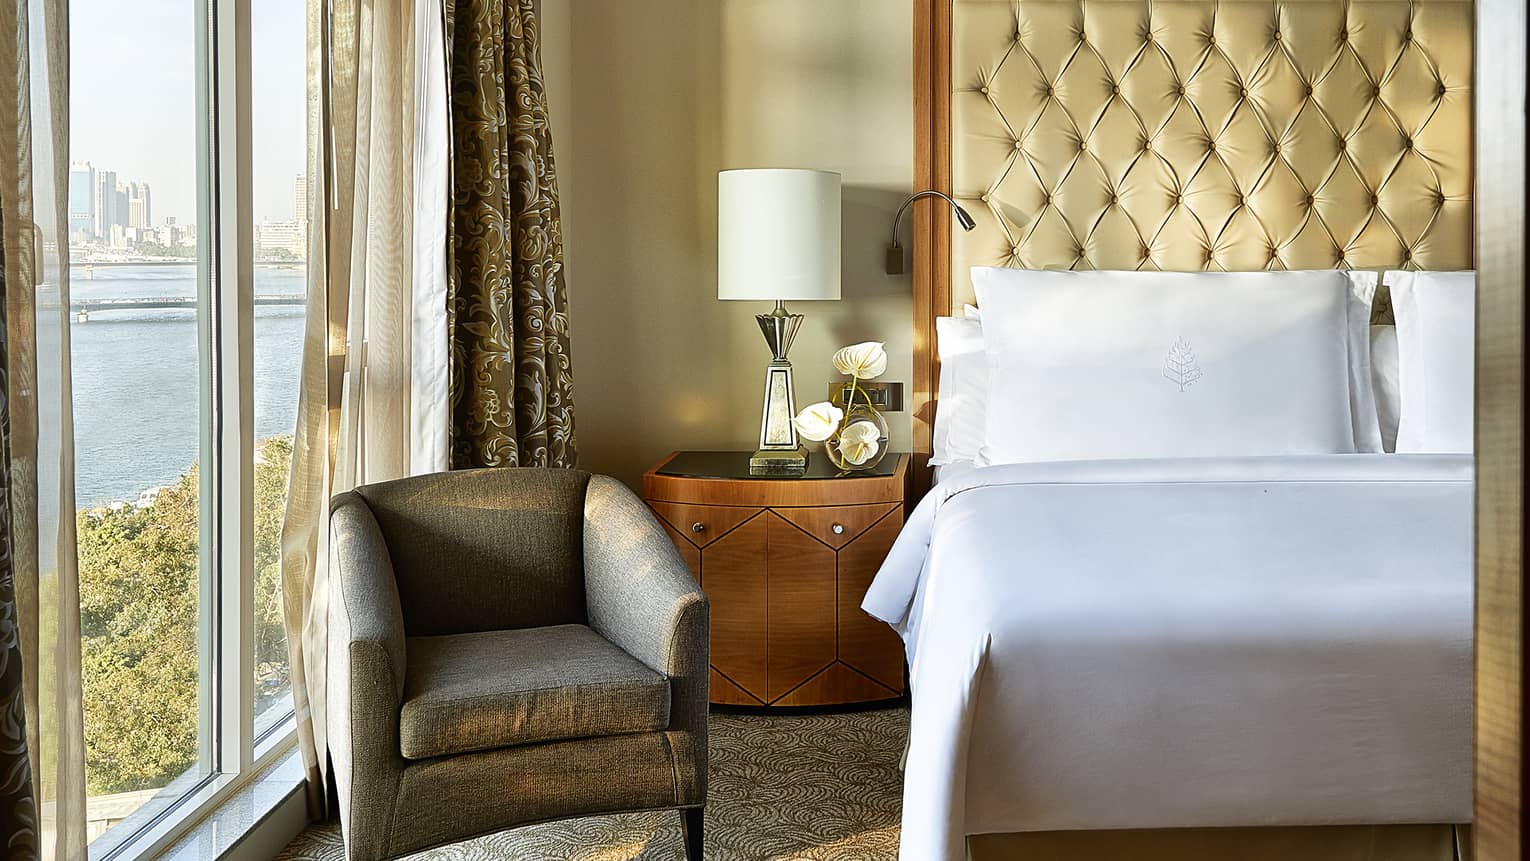 Royal Suite close-up of white pillows and tall leather headboard, wooden side table with lamp and white orchids